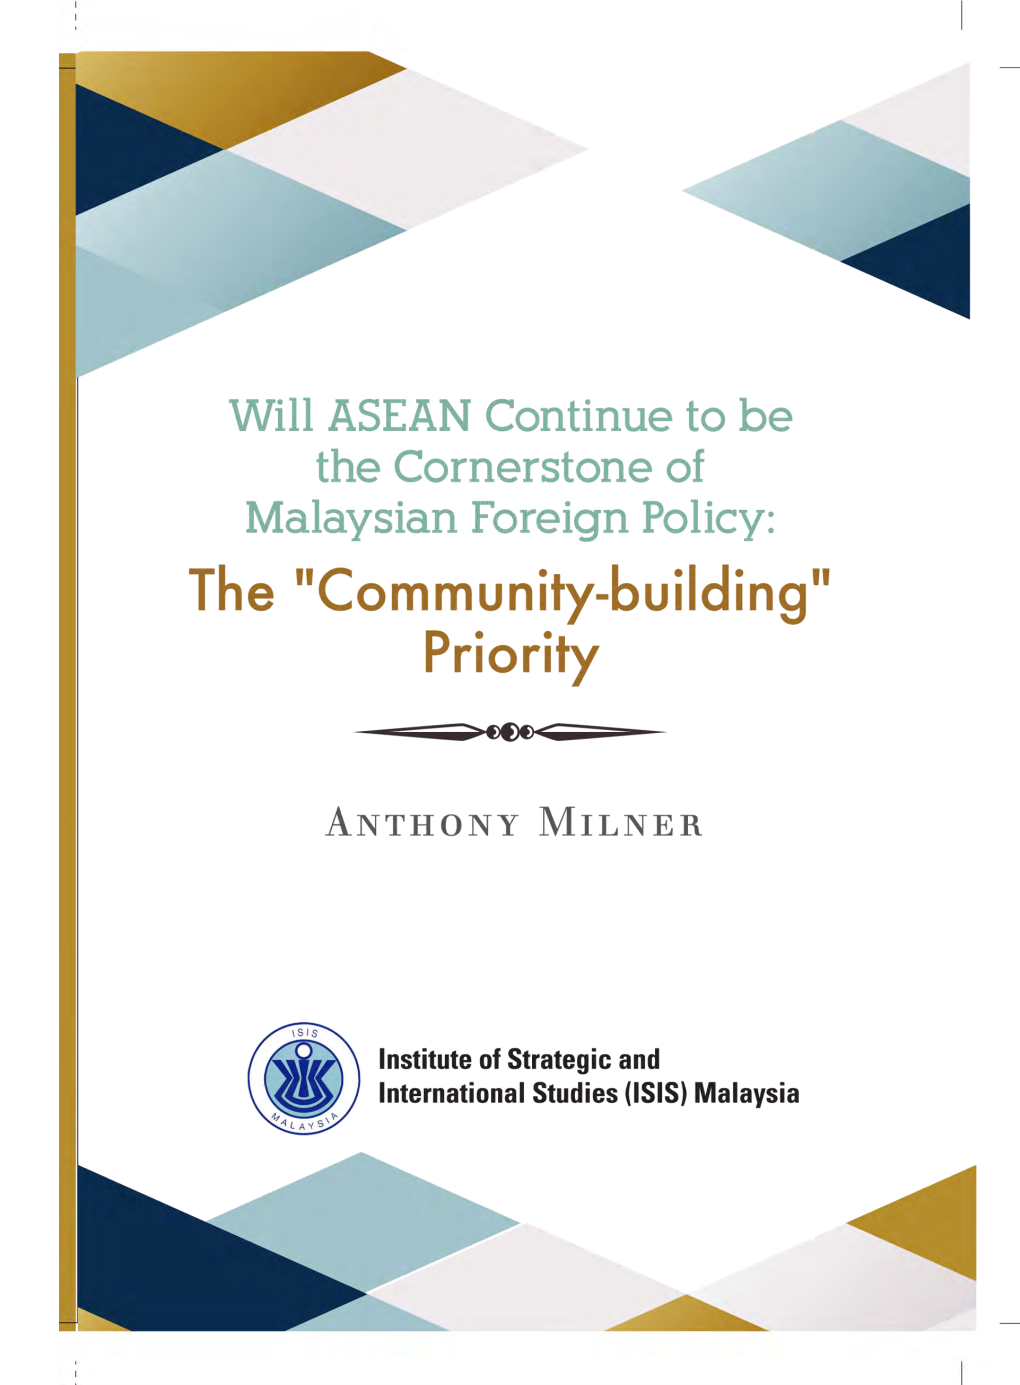 The “Community-Building” Priority